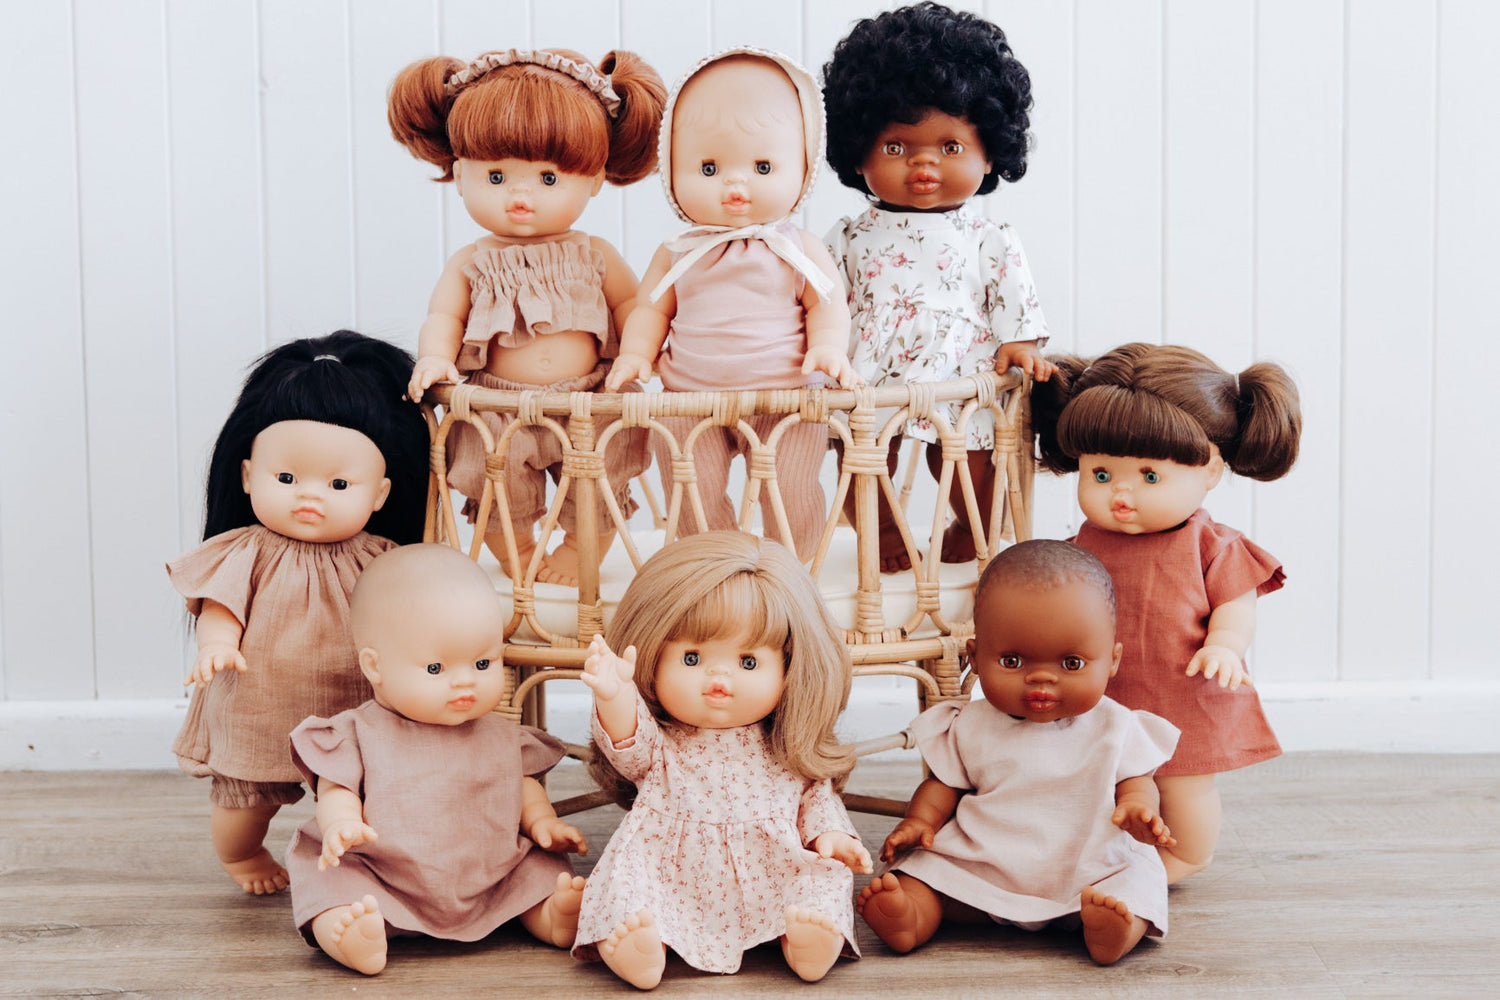 PAOLA REINA GORDIS DOLLS | CAUCASIAN BOY - NOAH by PAOLO REINA DOLLS - The Playful Collective